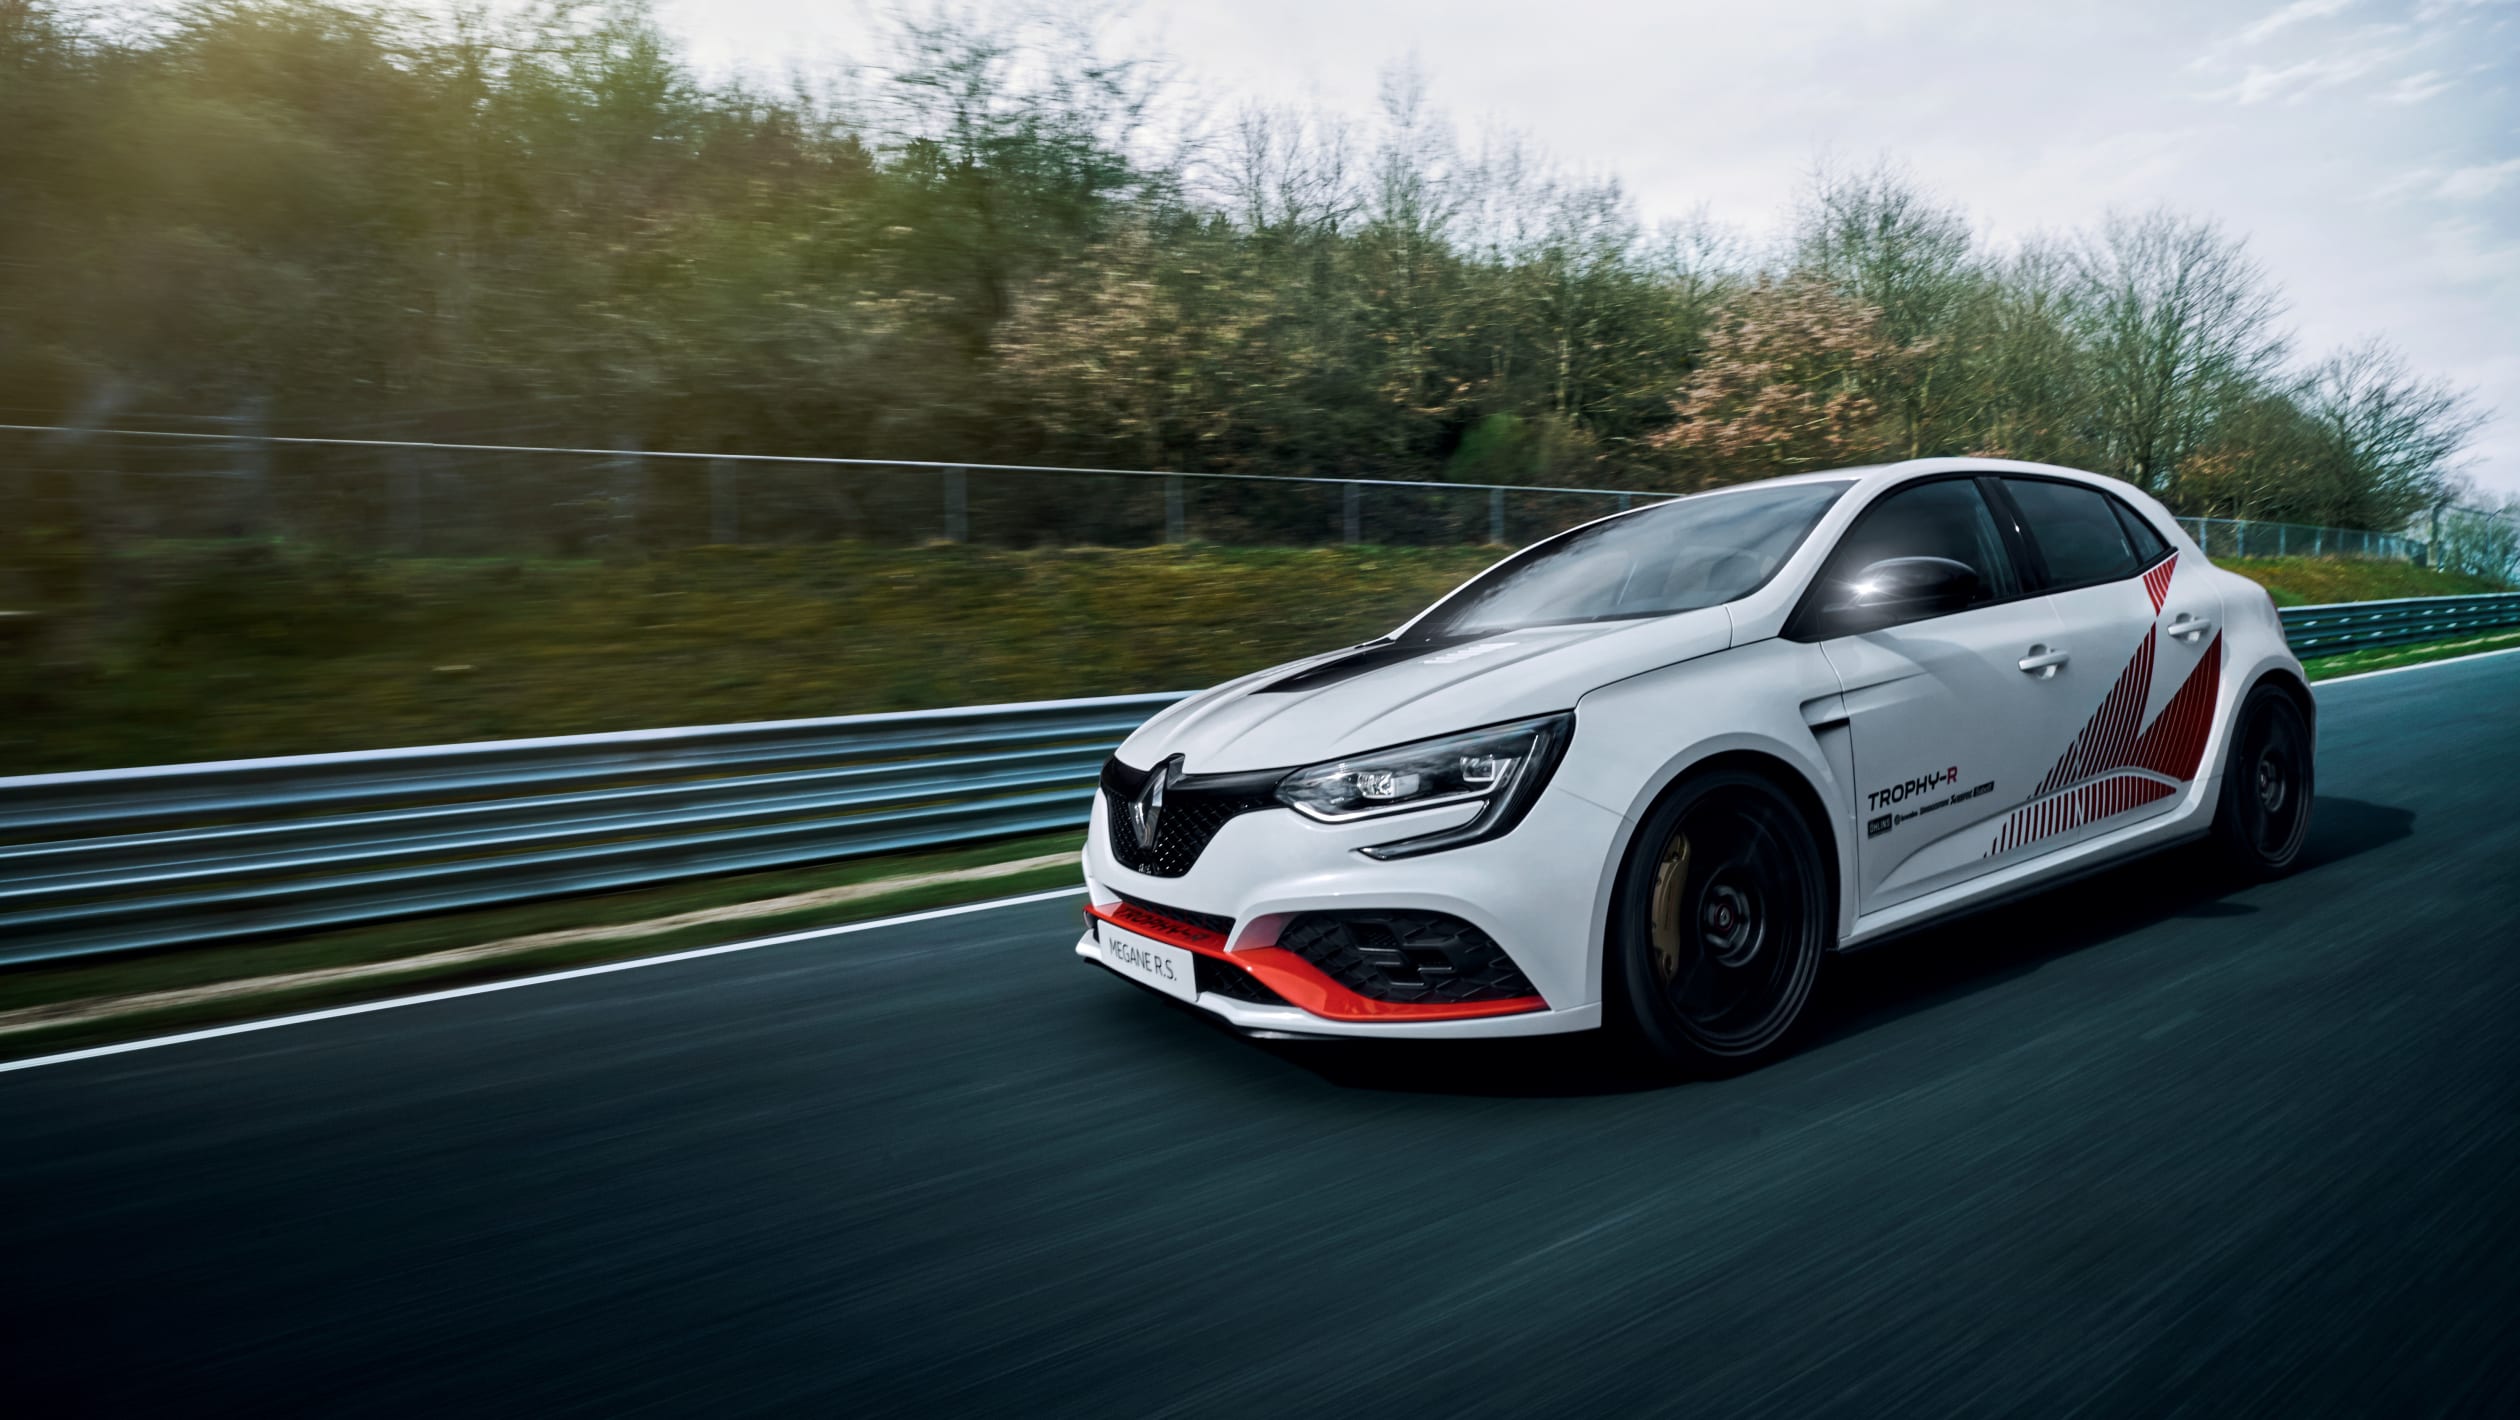 new megane r.s. trophy r fastest ever front wheel drive production car at the nurburgring embargo 14h00 210519 4